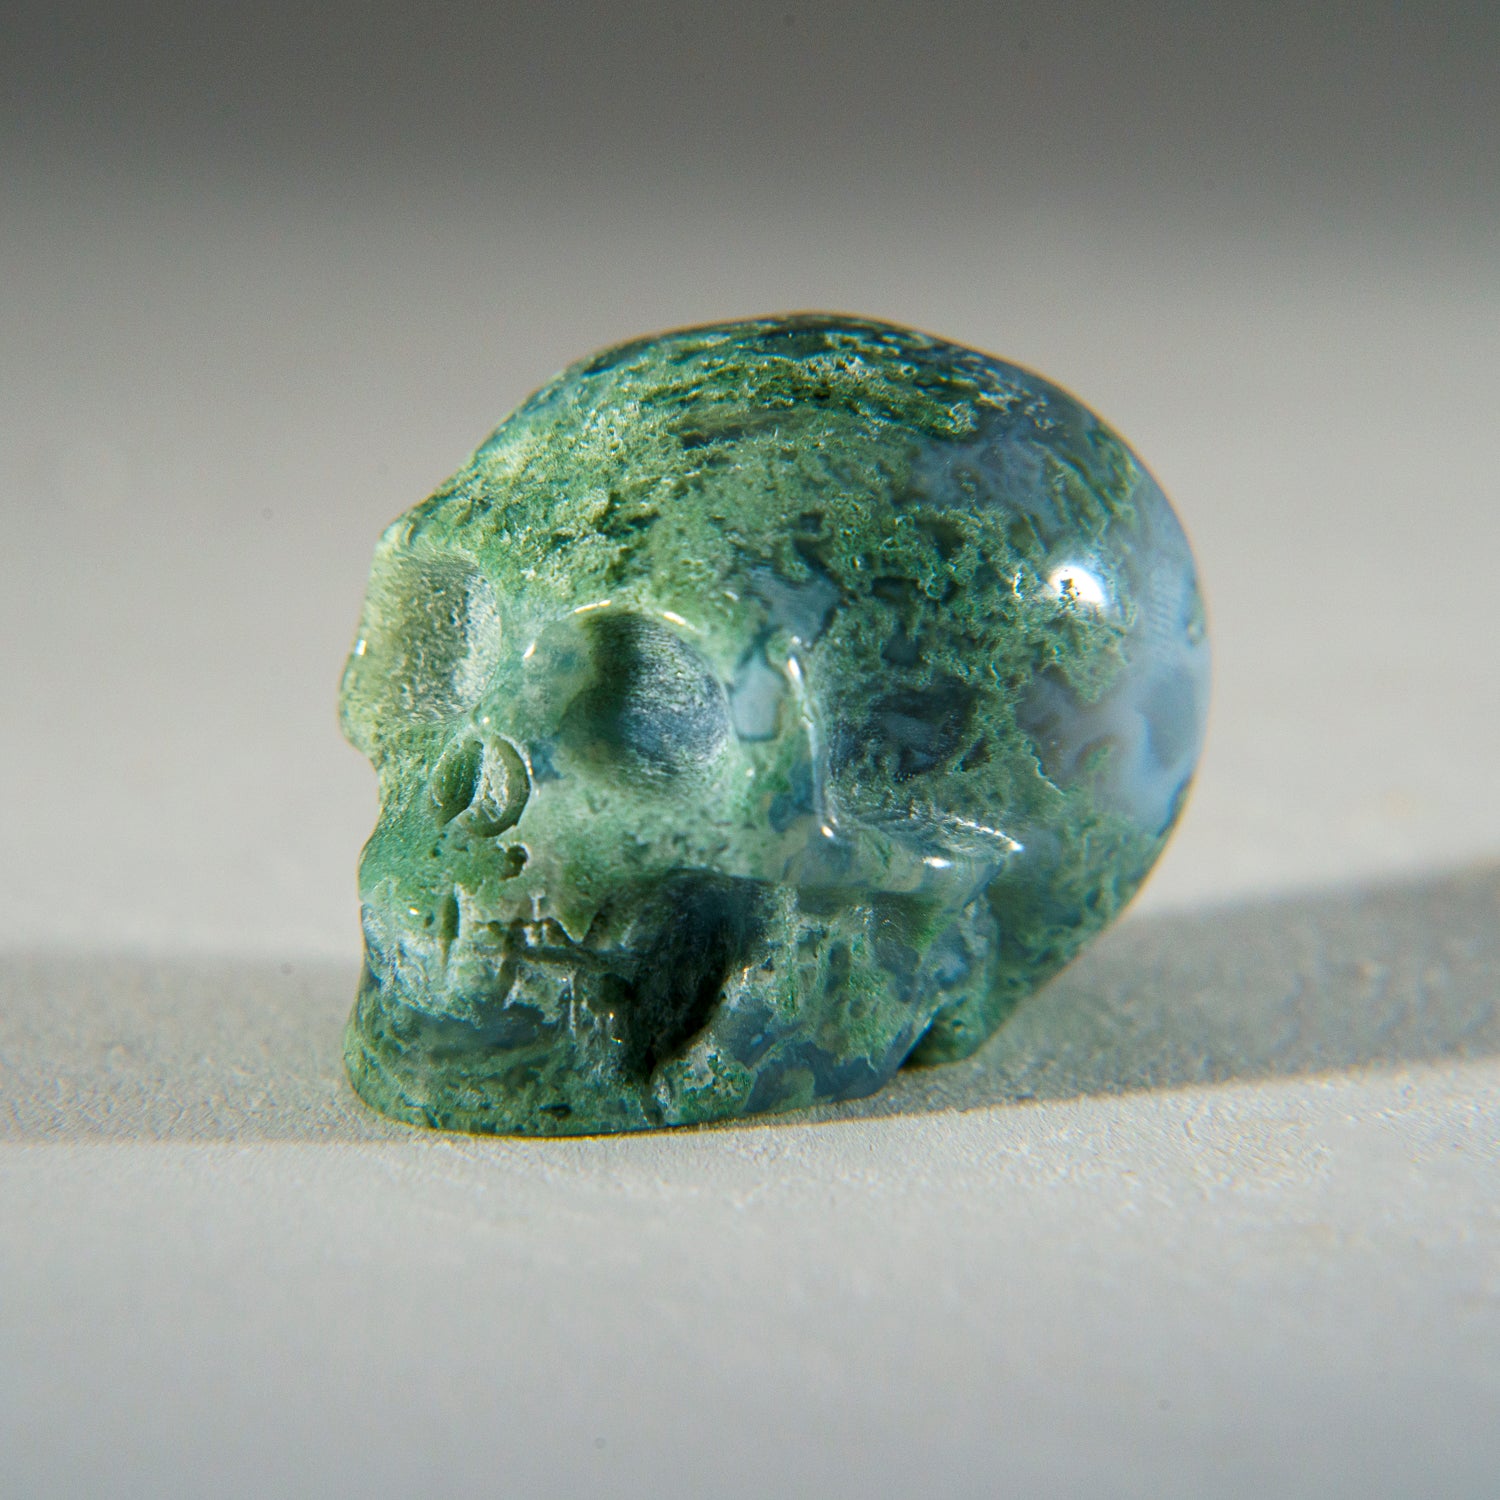 Polished Green Moss Agate Skull Carving (25 grams)